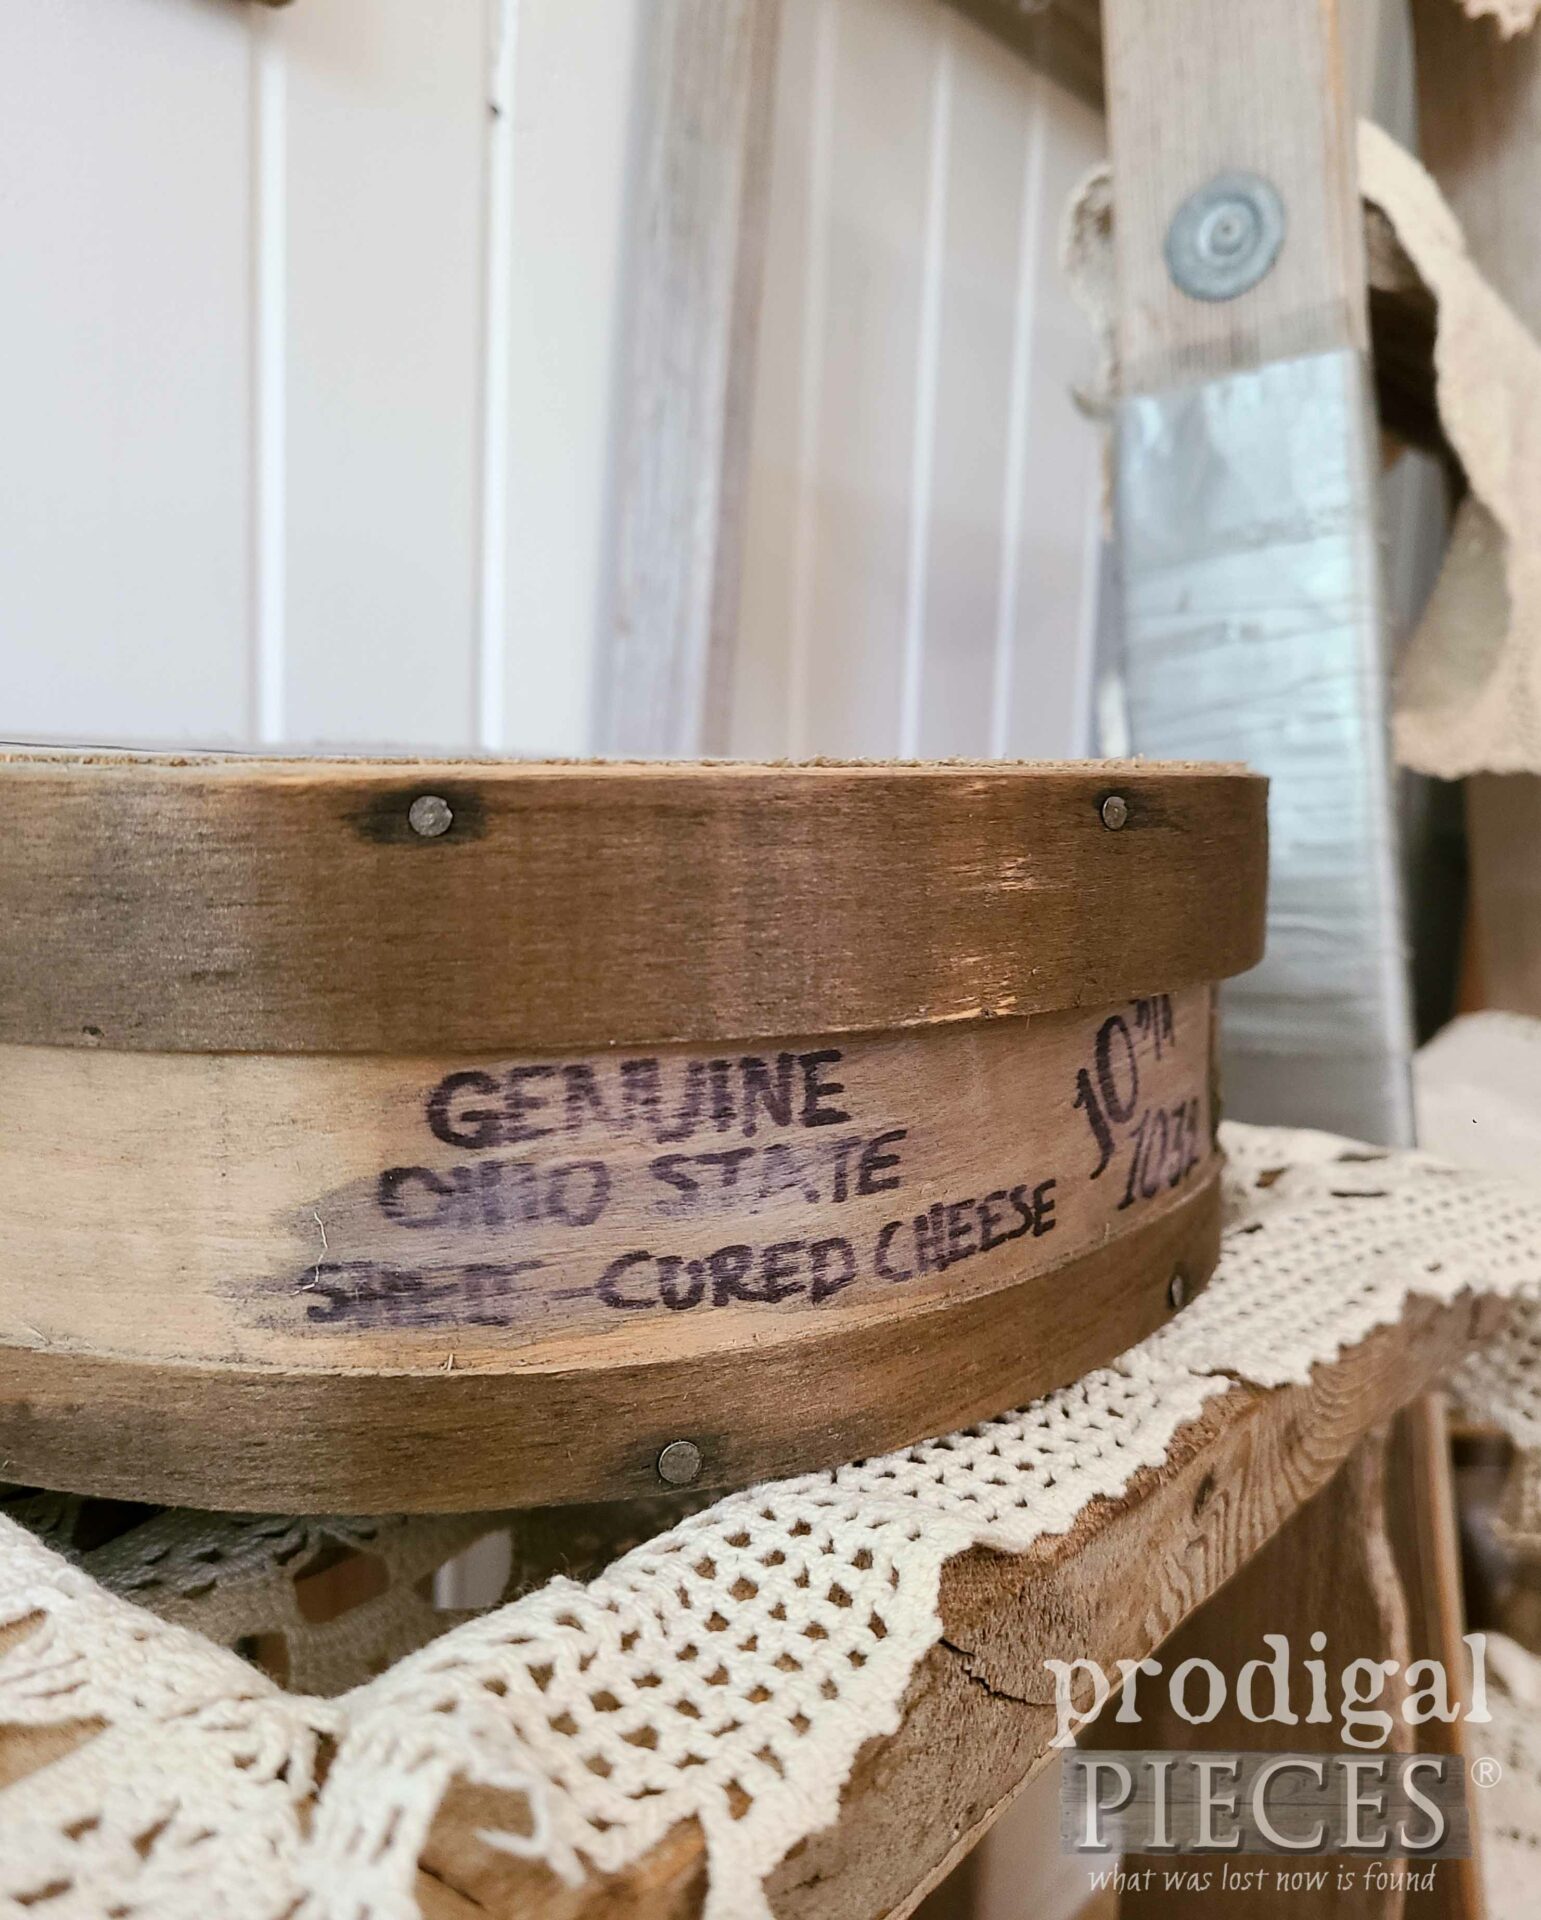 Ohio State Cured Cheese on DIY Antique Cheese Box by Larissa of Prodigal Pieces | prodigalpieces.com #prodigalpieces #rustic #farmhouse